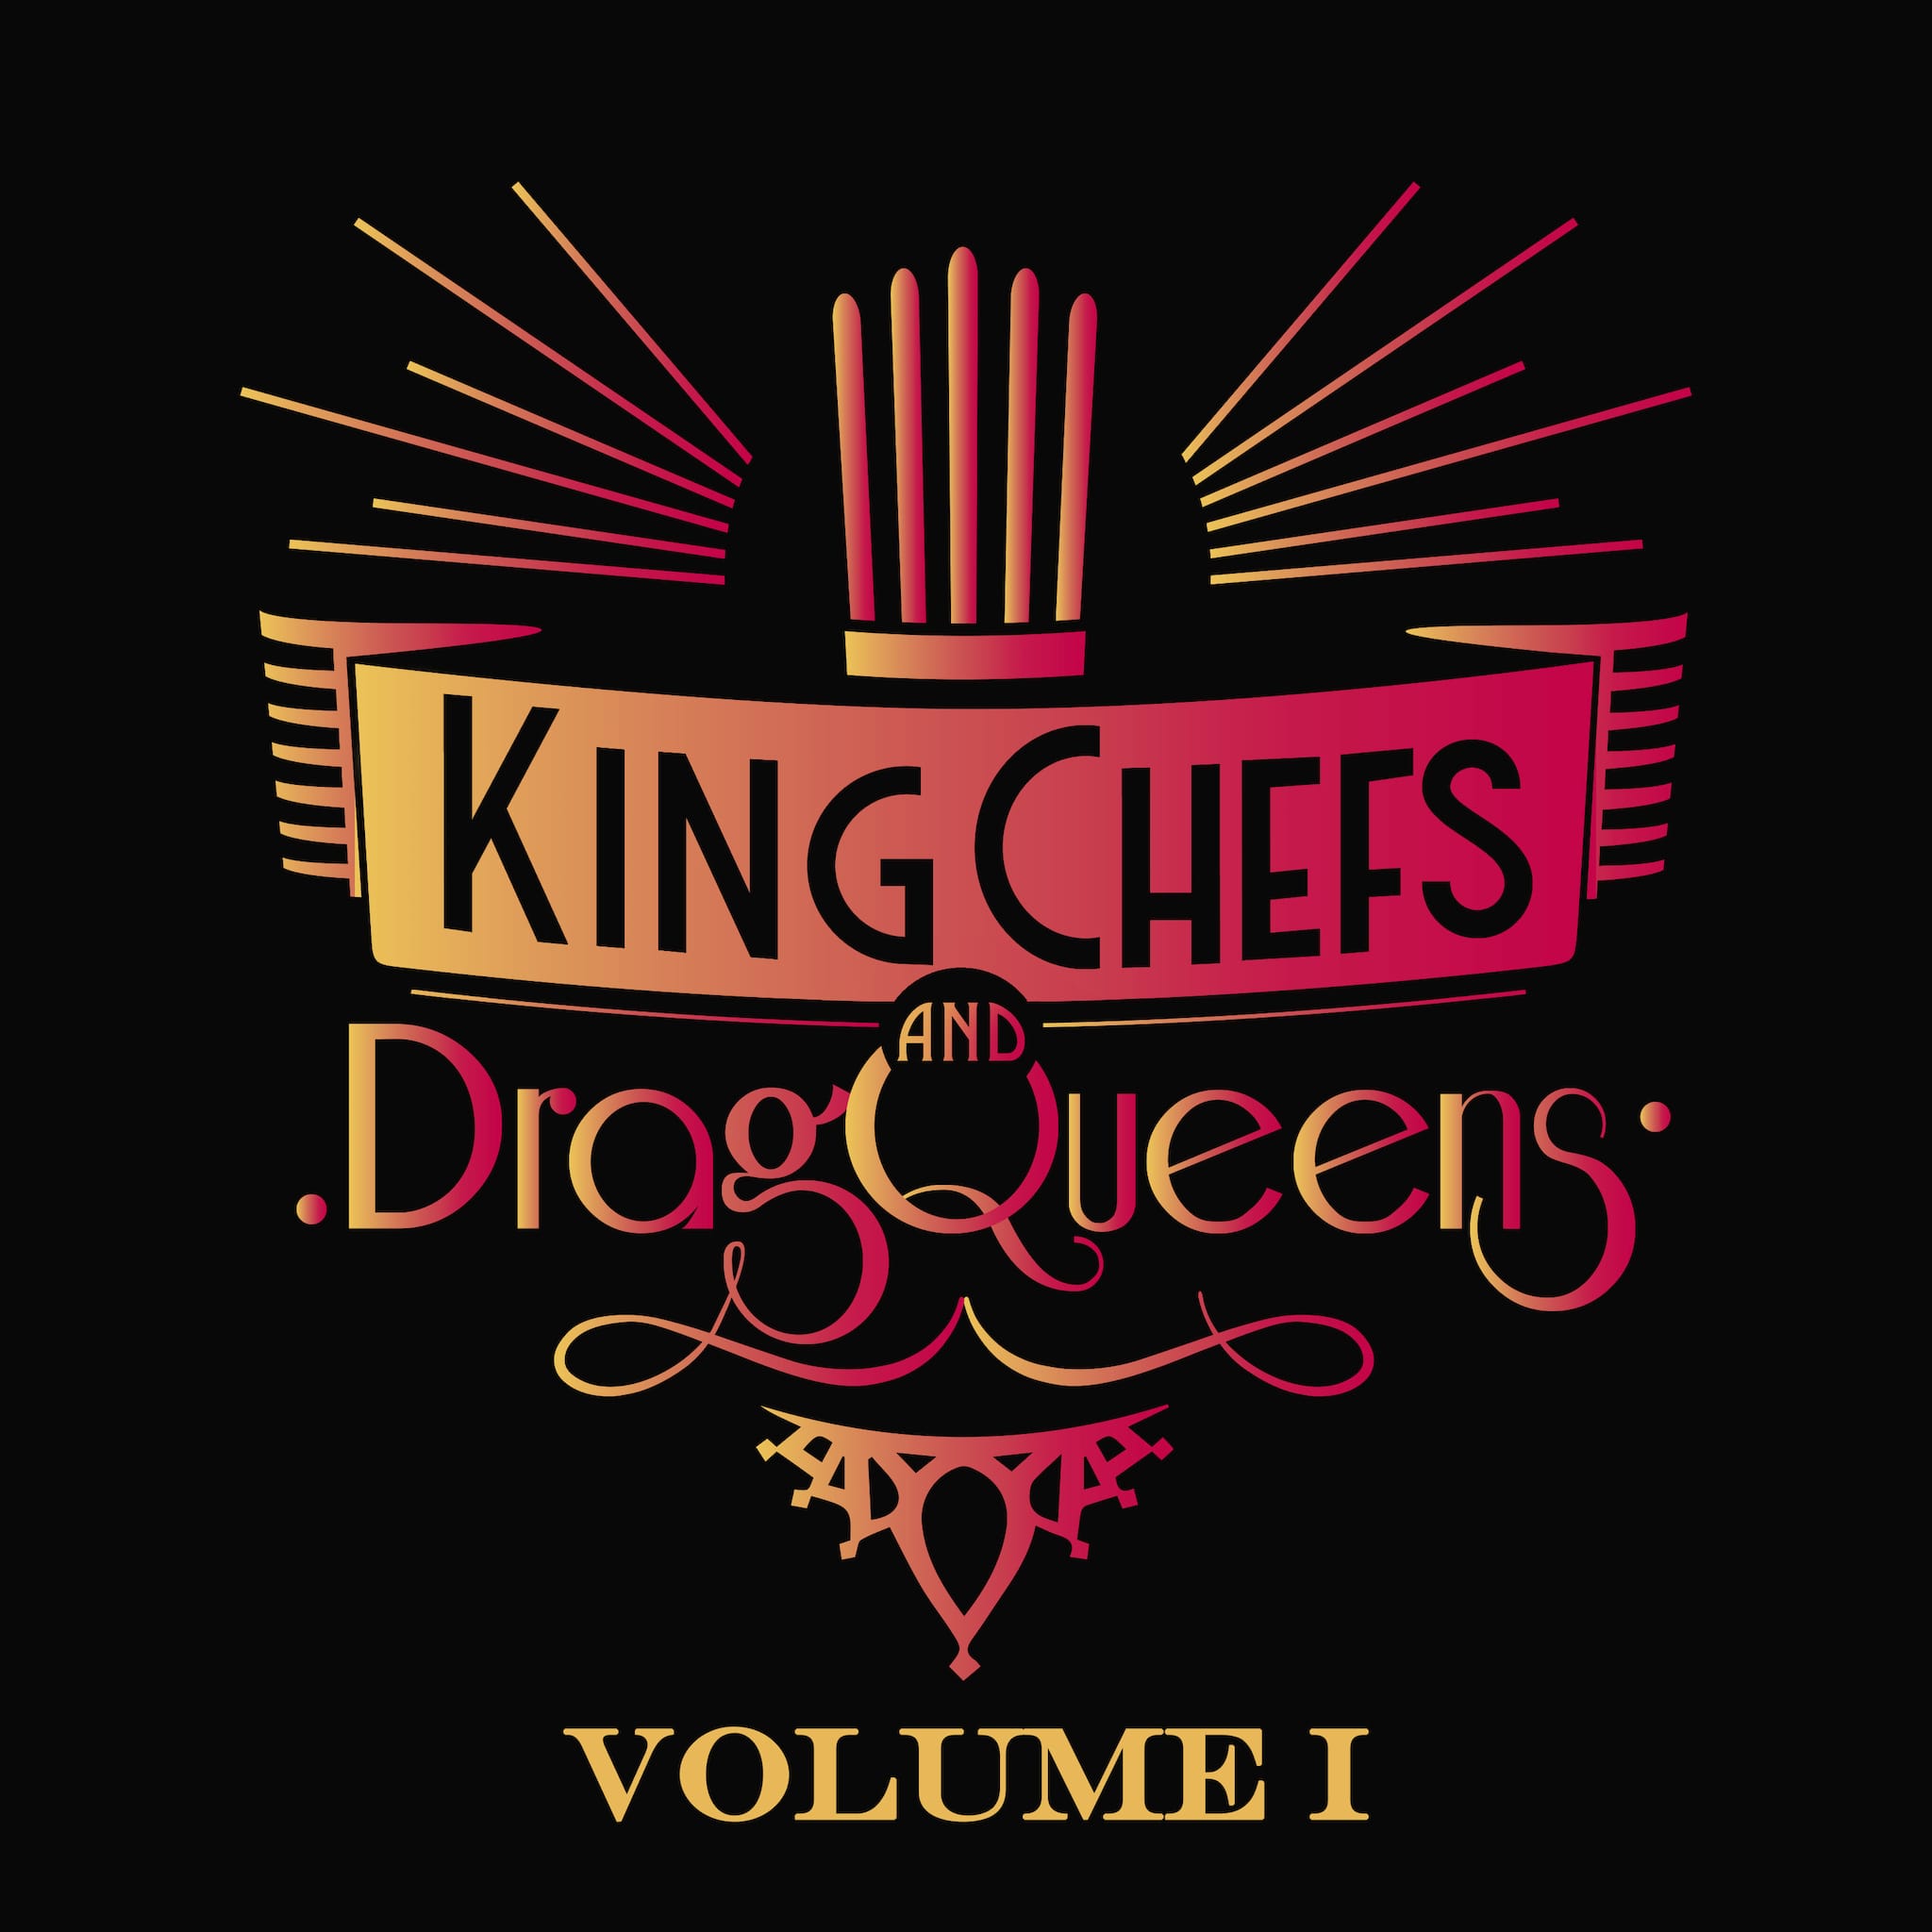 King Chefs & Drag Queens image cover pochette EP VOLUME I musique